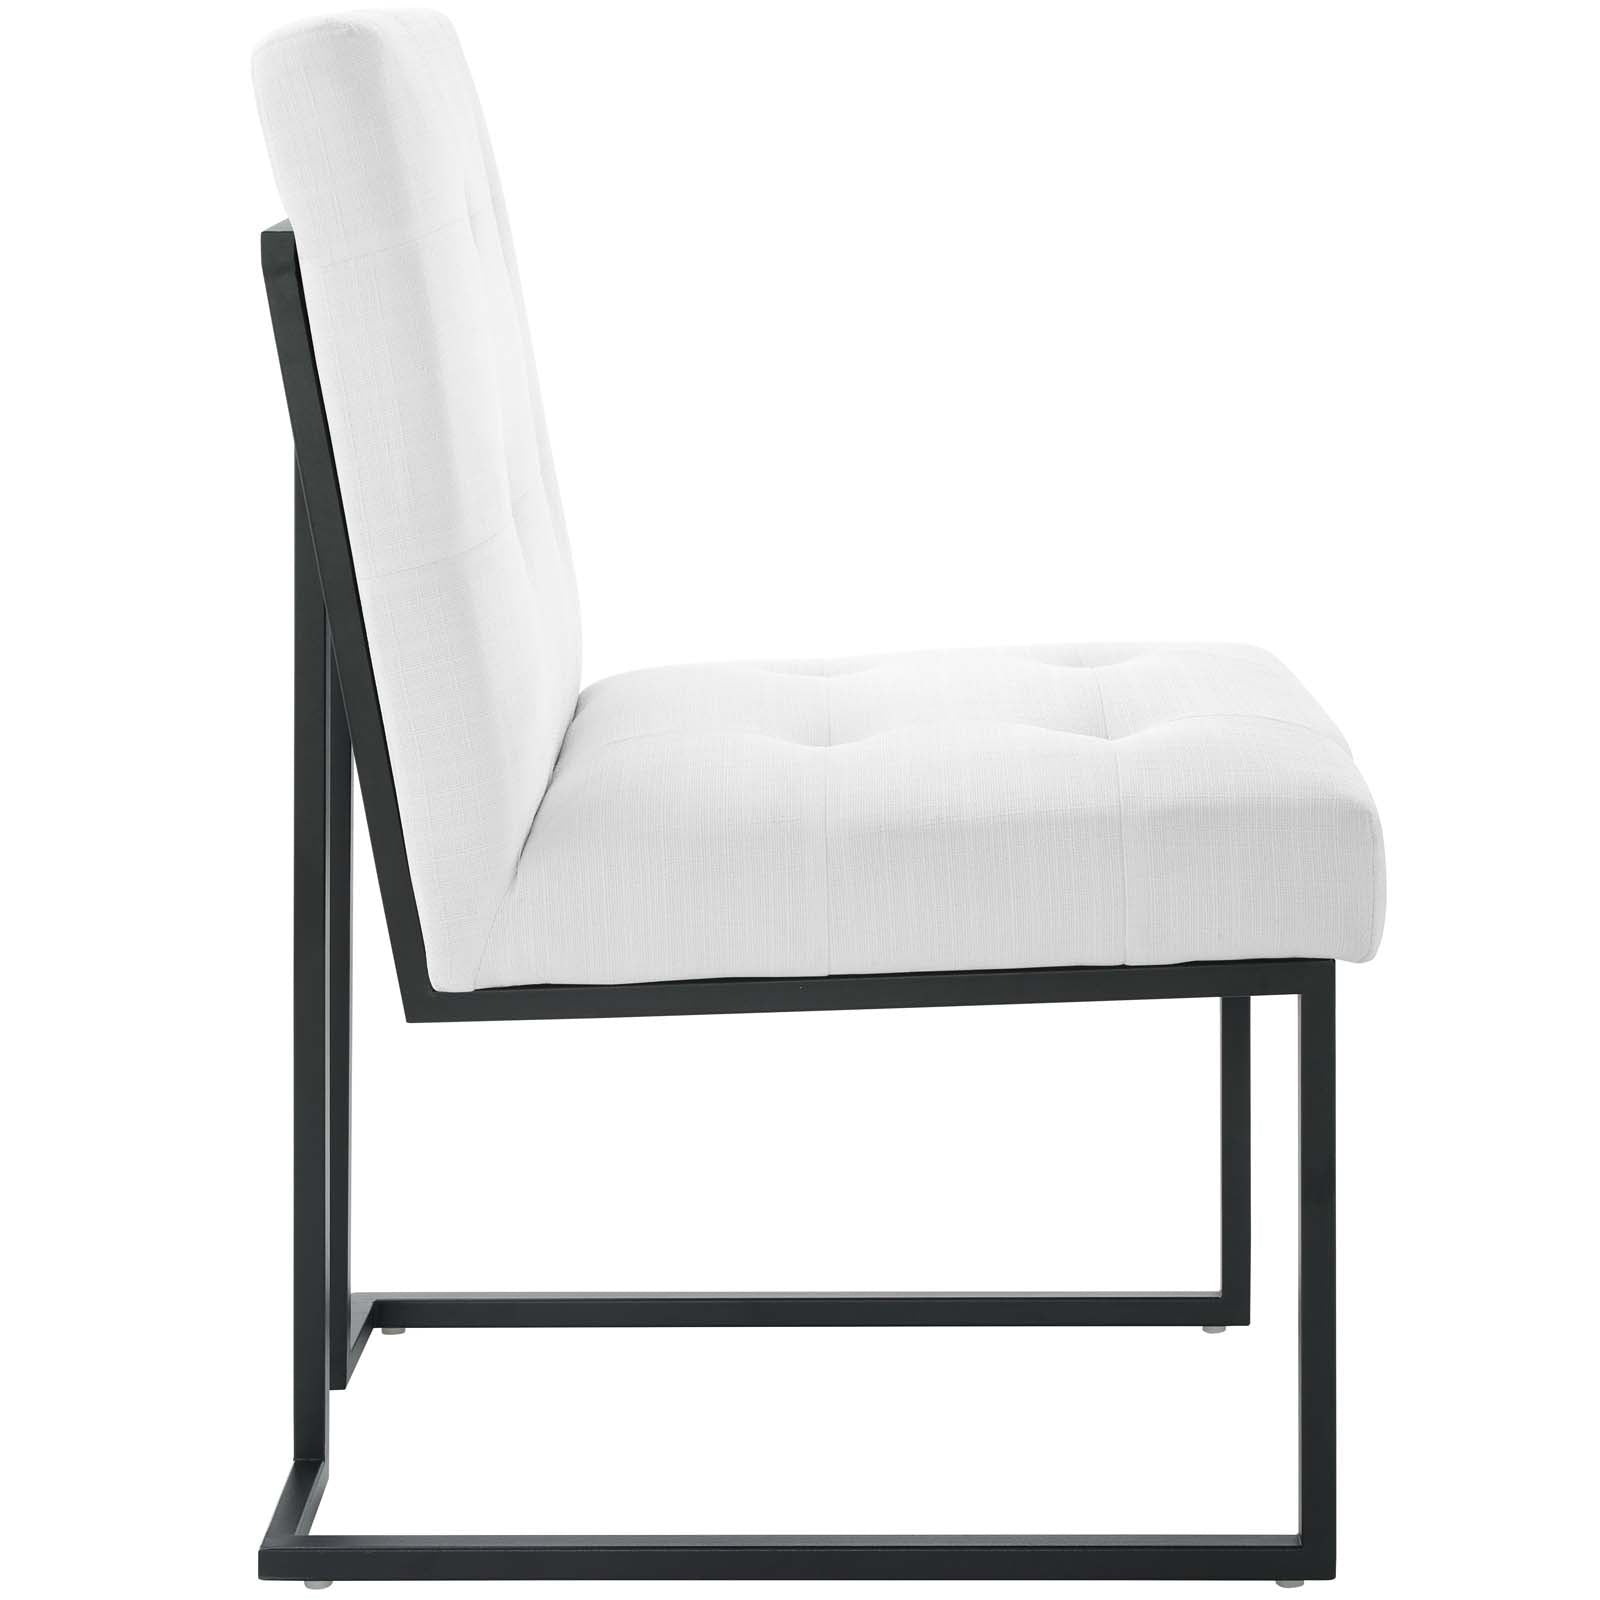 Modway Dining Chairs - Privy Black Stainless Steel Upholstered Fabric Dining Chair Black White